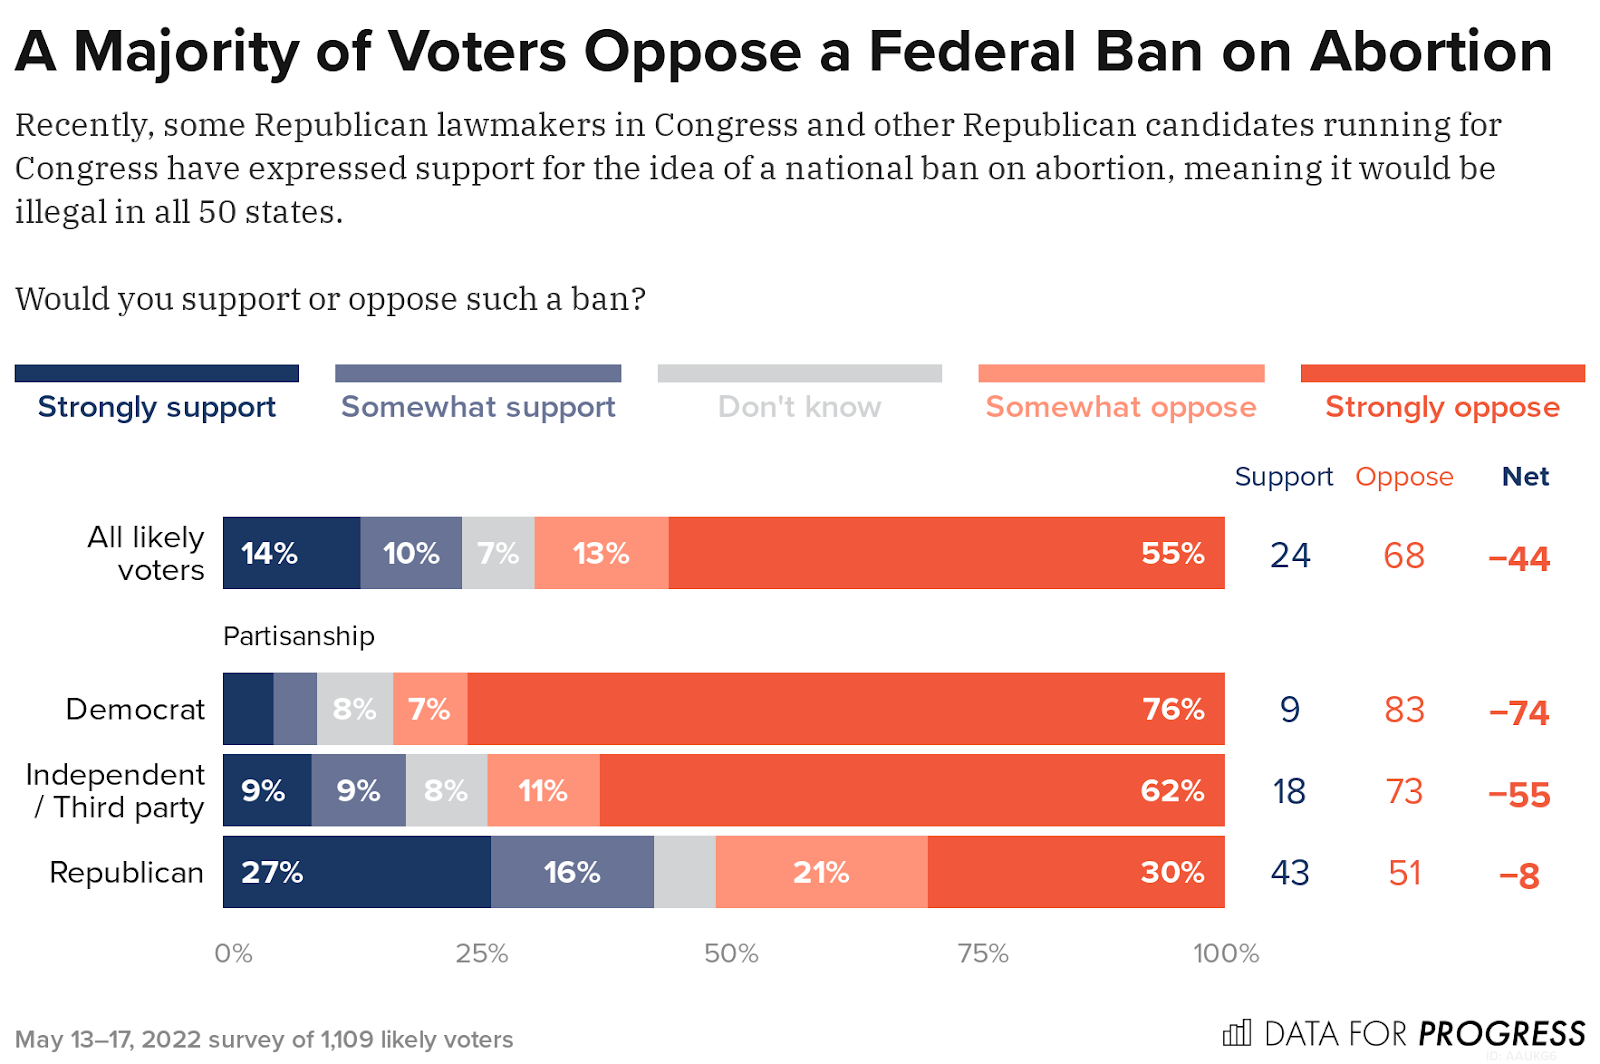 EXCLUSIVE: Voters Oppose National Abortion Ban and Are 'Worried,' 'Sad,' and 'Angry' Over State of Abortion Rights, According to New Poll